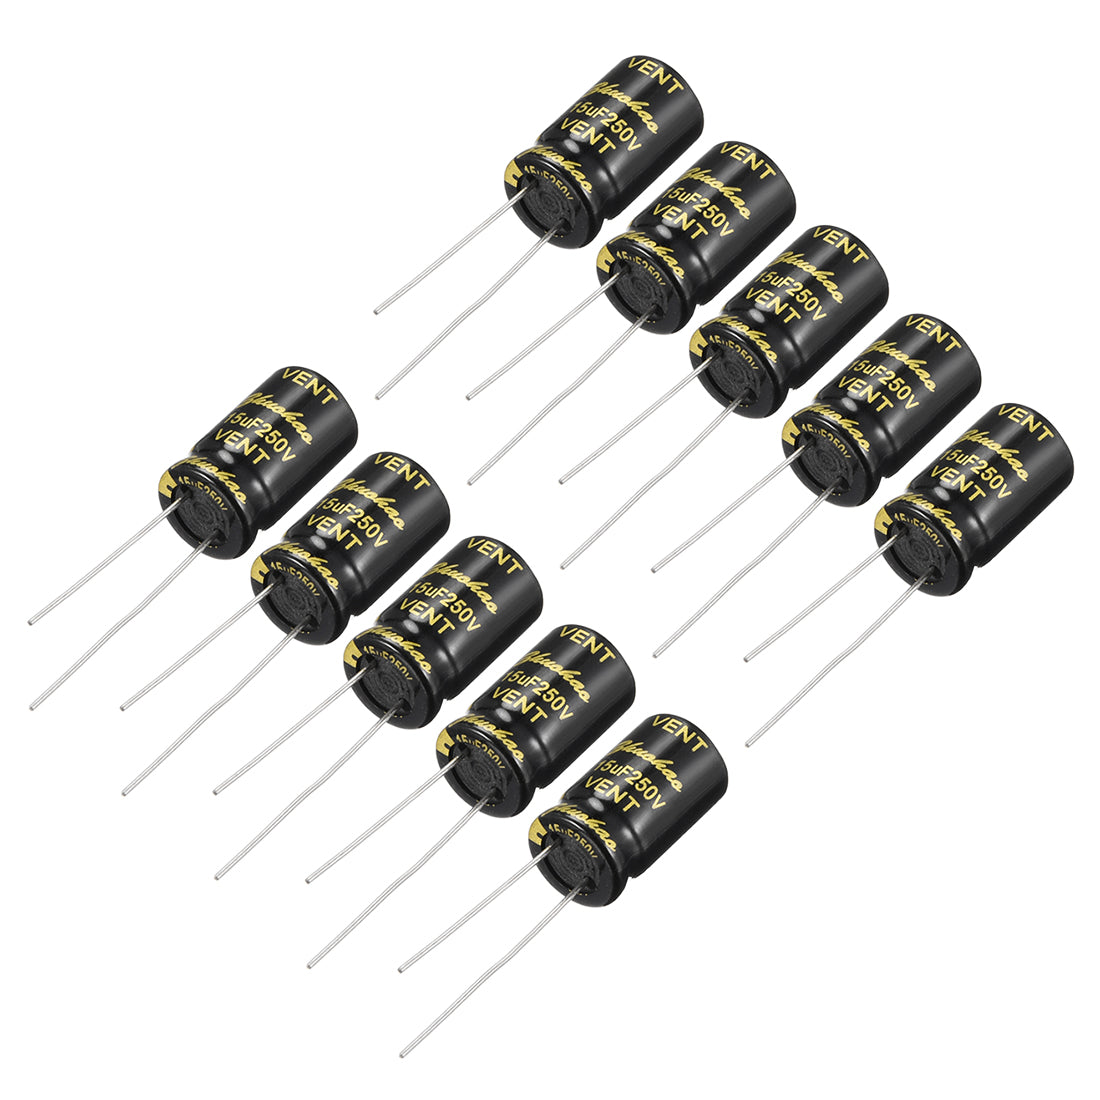 uxcell Uxcell Aluminum Radial Electrolytic Capacitor with 15uF 250V 105 Celsius Life 2000H 10 x 17 mm Black 10pcs